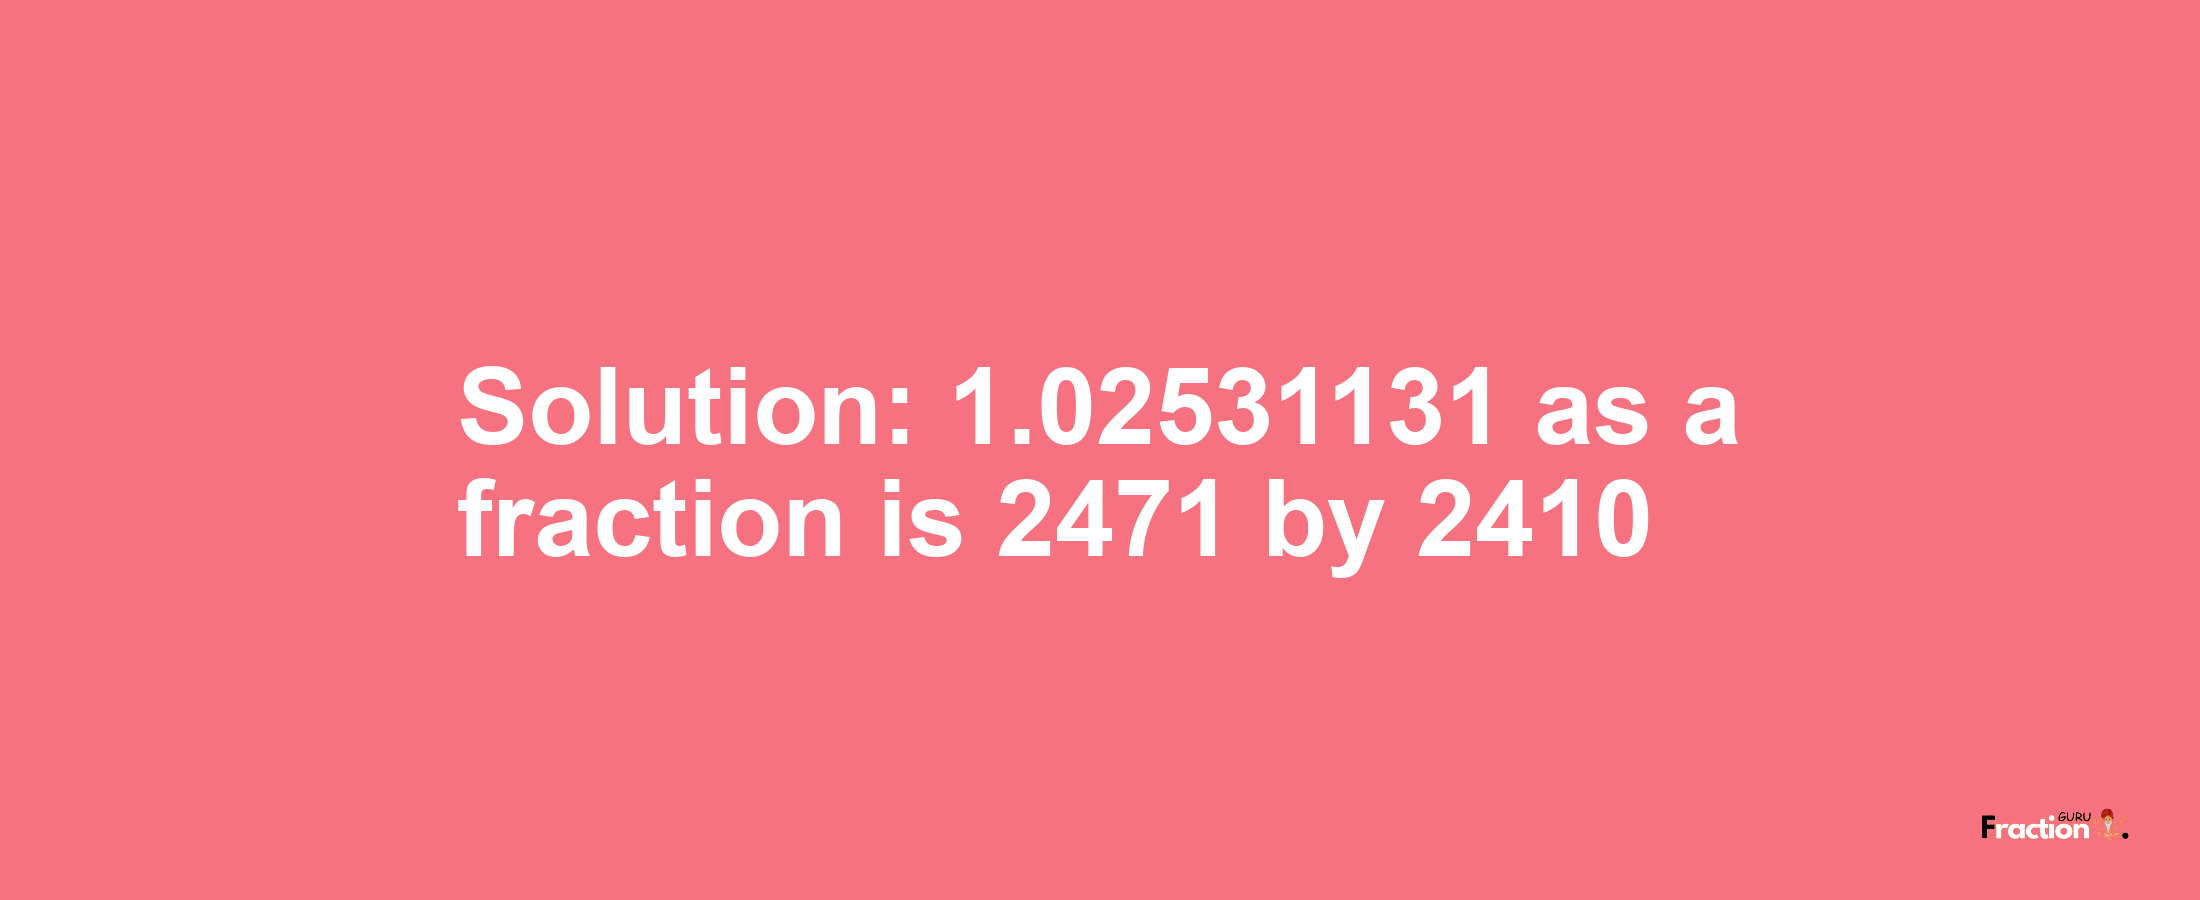 Solution:1.02531131 as a fraction is 2471/2410